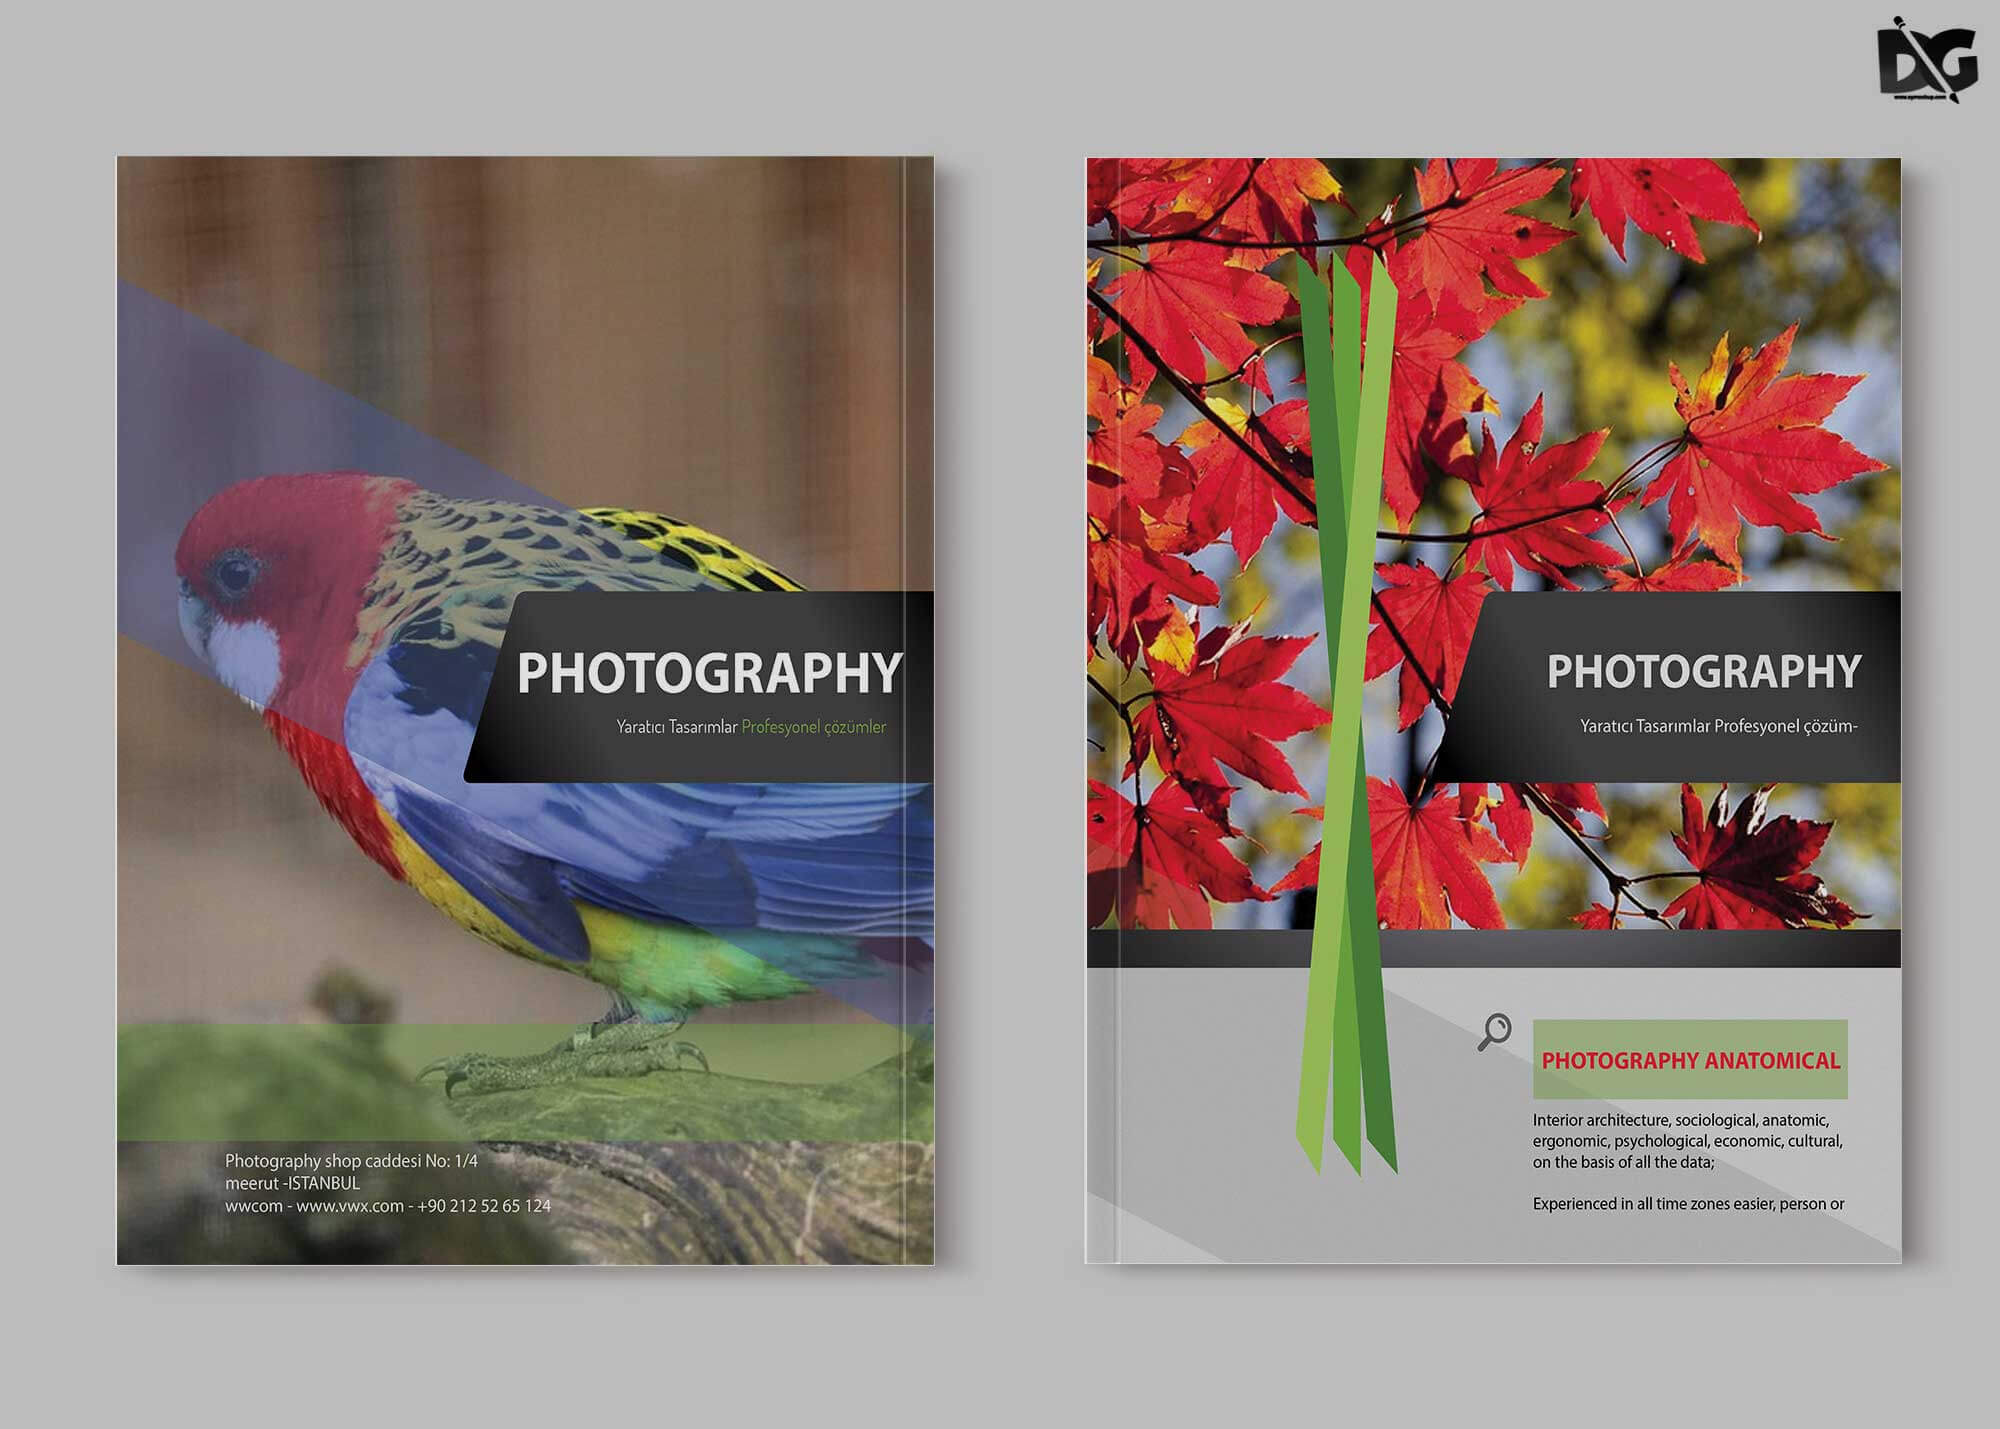 Free Zoo Photography Psd Brochure Template | Free Psd Mockup Inside Zoo Brochure Template